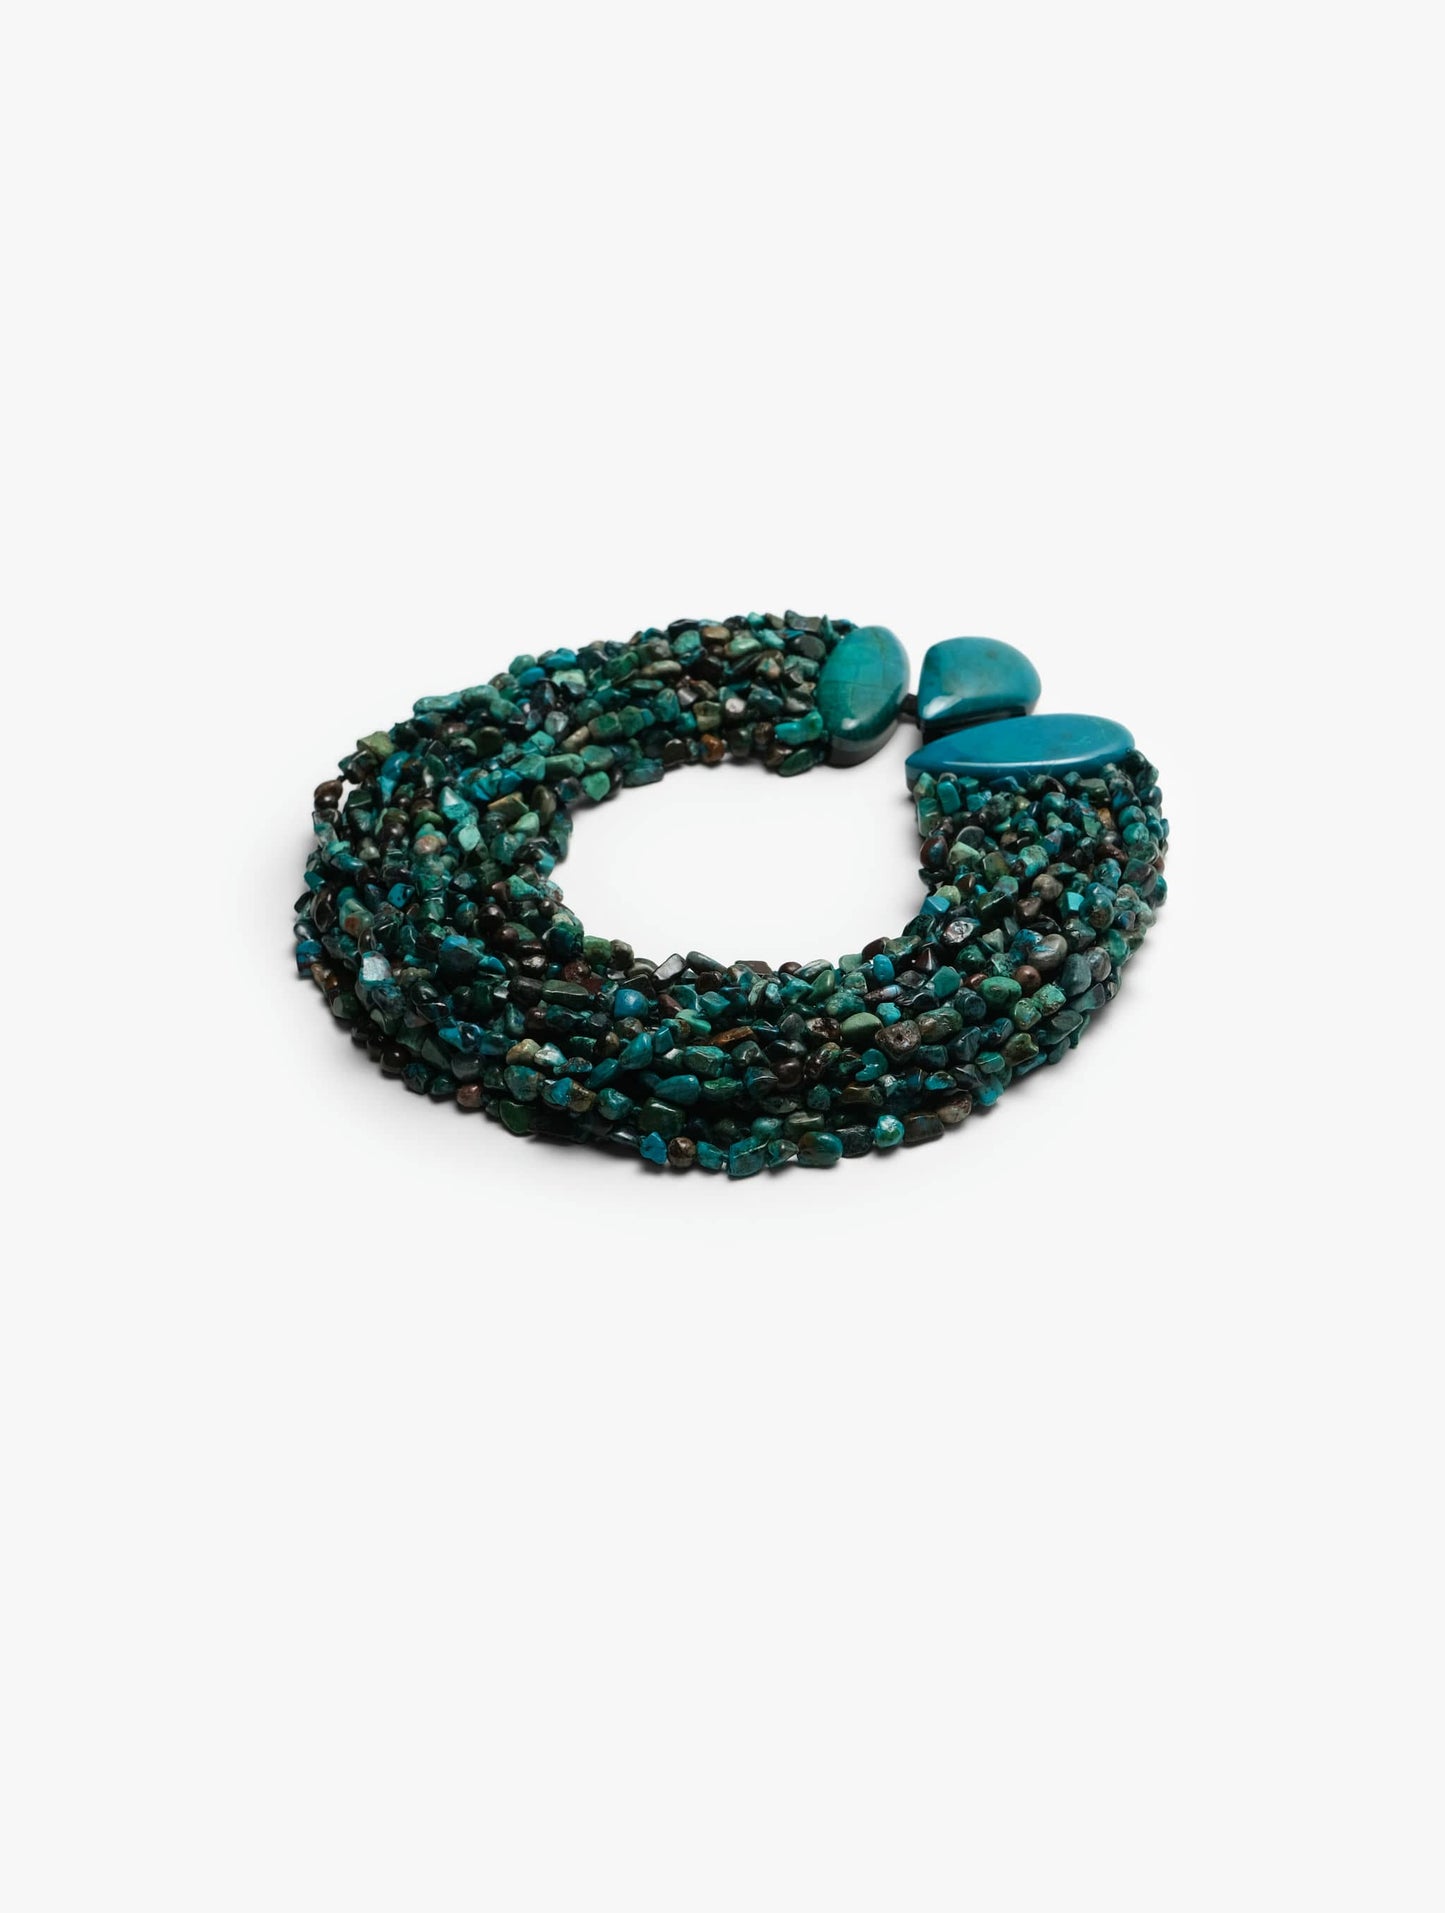 Necklace: chrysocolla